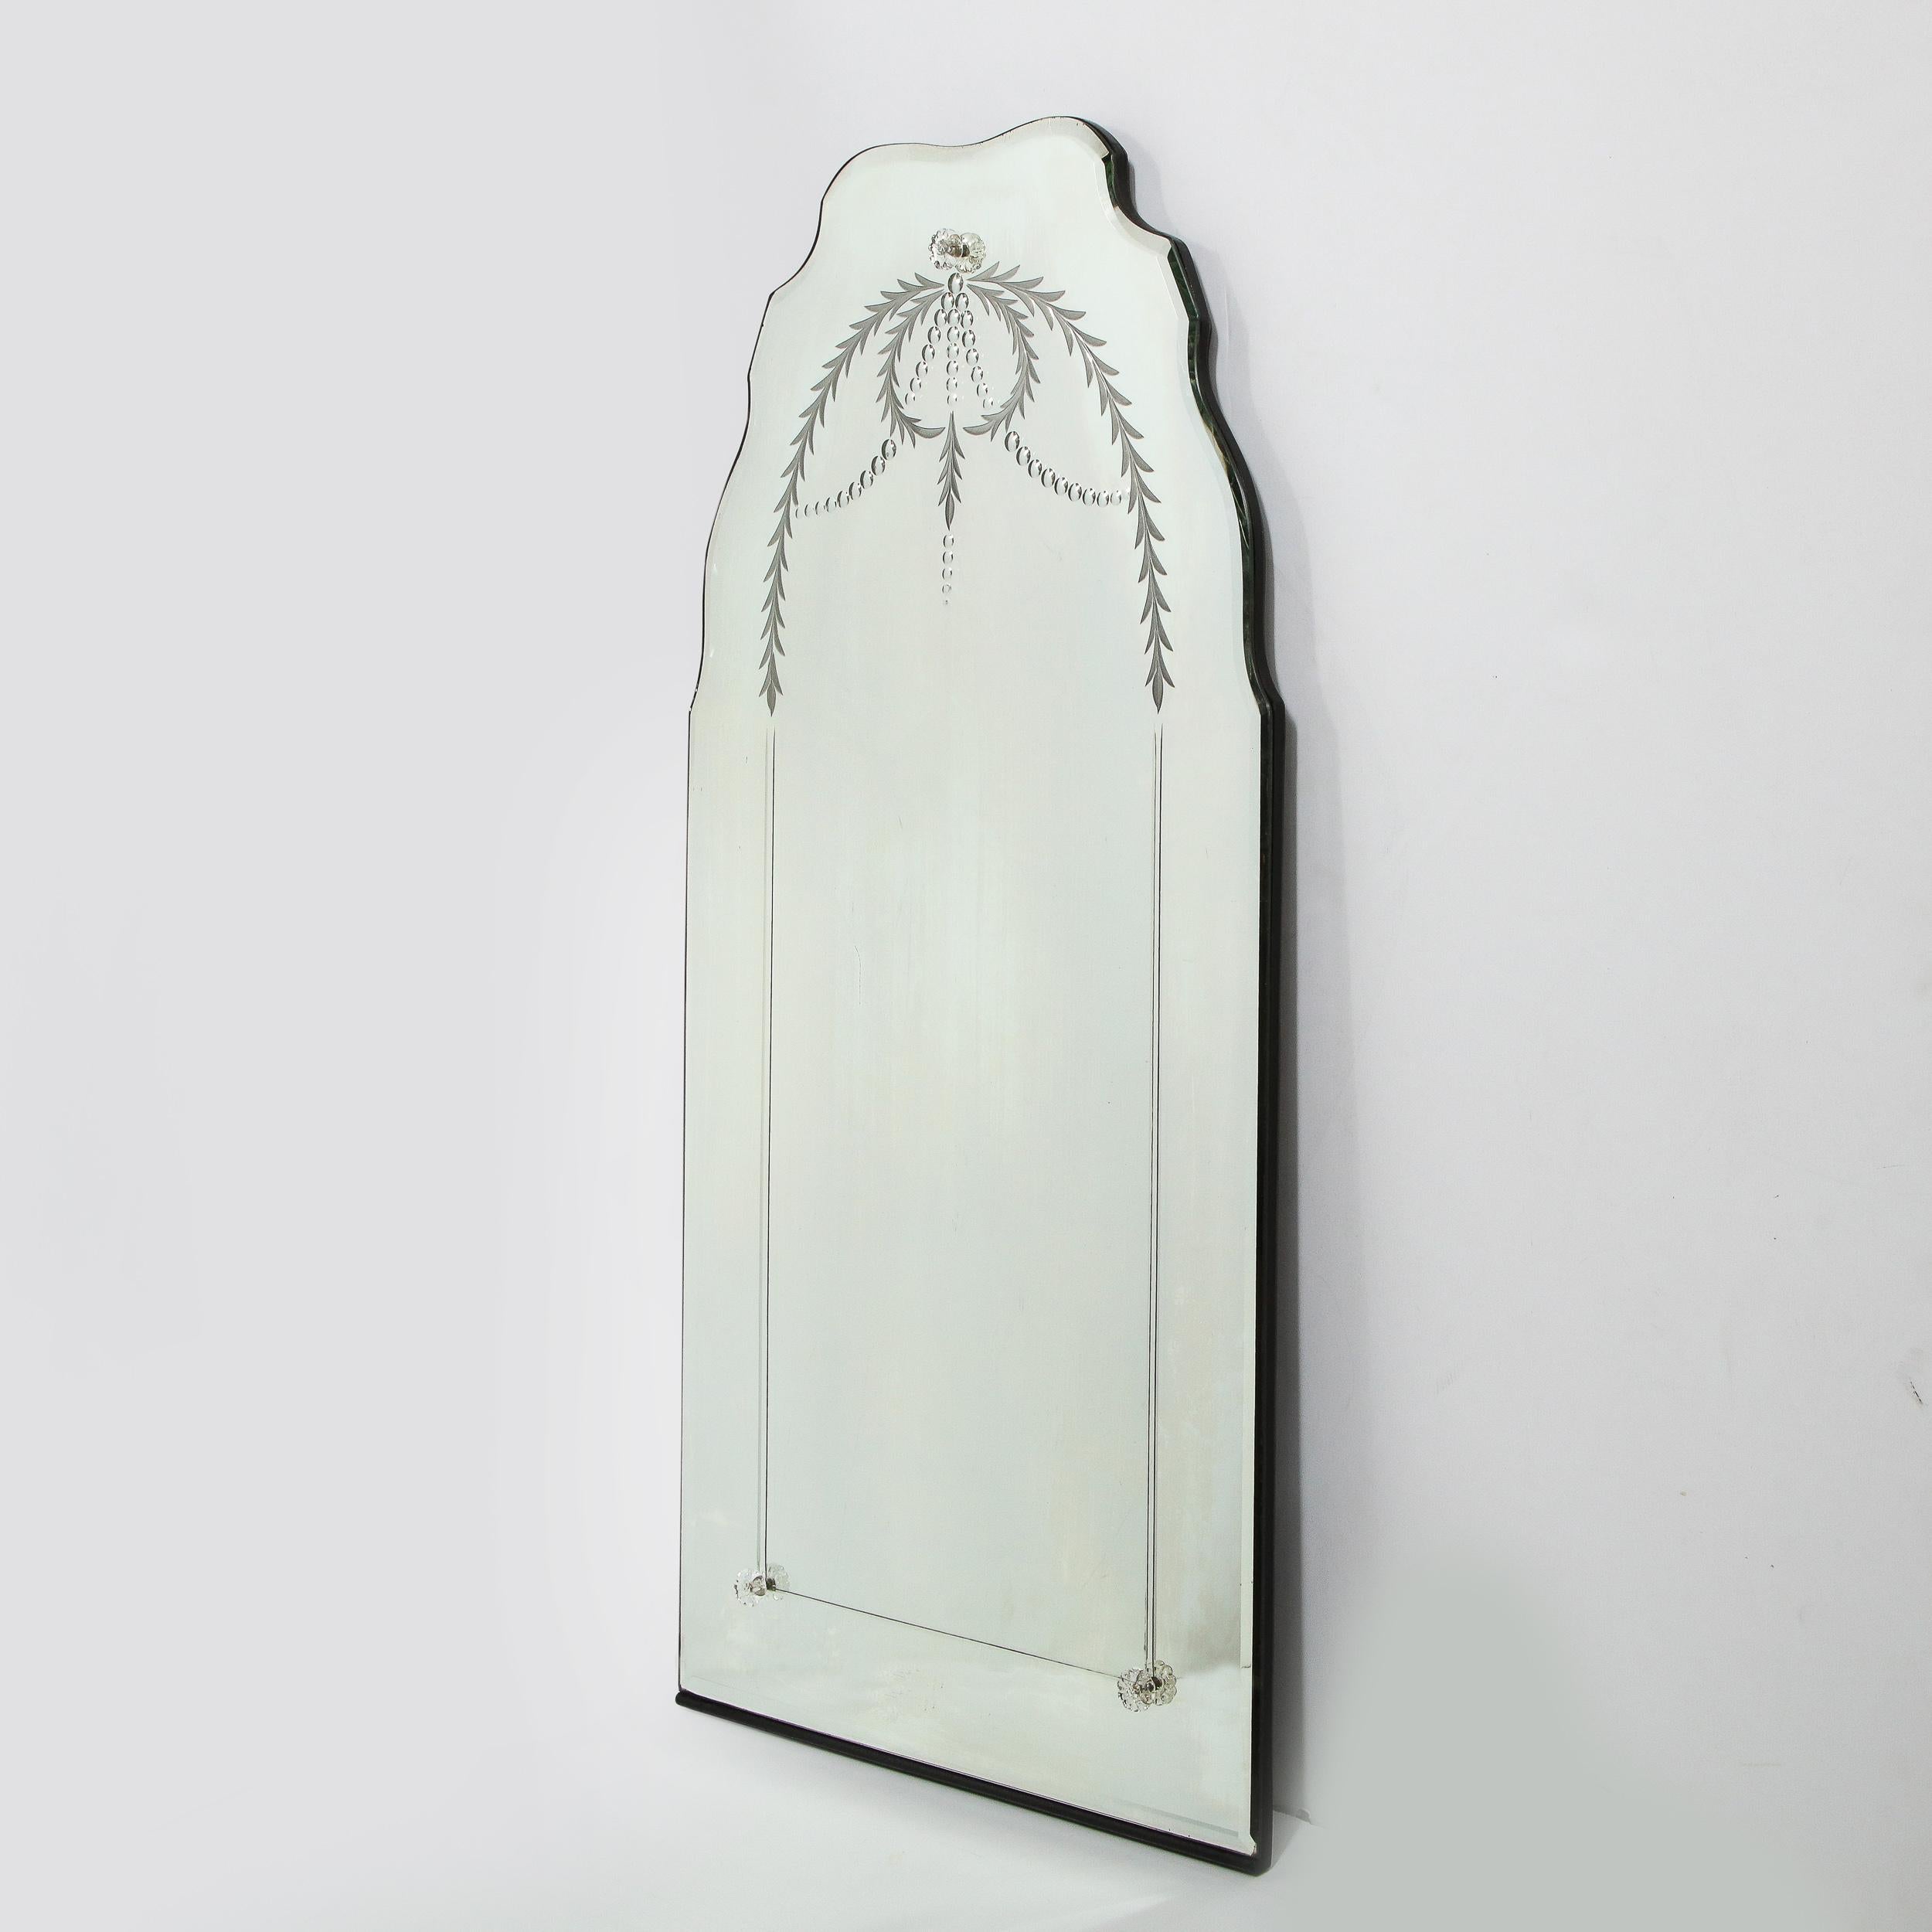 Mid-20th Century Art Deco Mirror with Laurel Wreath Detailing, Chain Beveling & Scalloped Borders